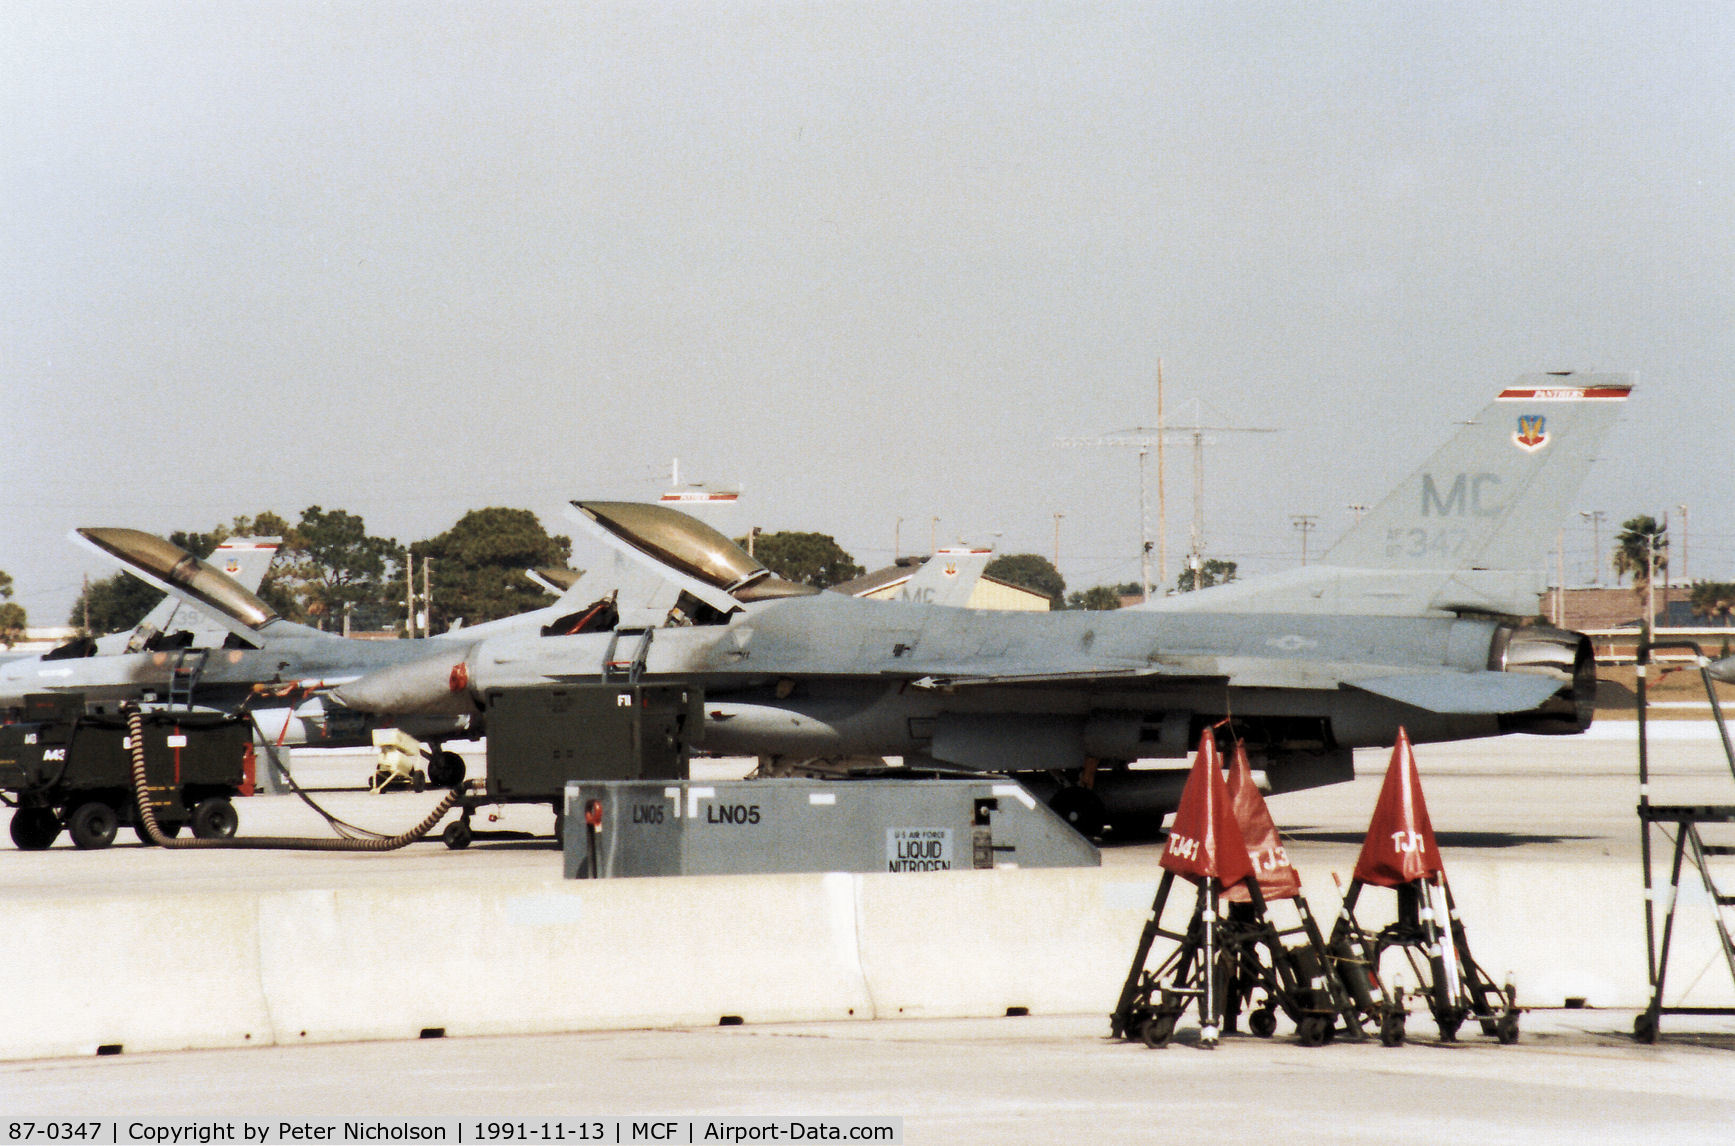 87-0347, 1987 General Dynamics F-16C Fighting Falcon C/N 5C-608, F-16C Falcon of 63rd Fighter Squadron/52nd Fighter Wing at MacDill AFB in November 1991.